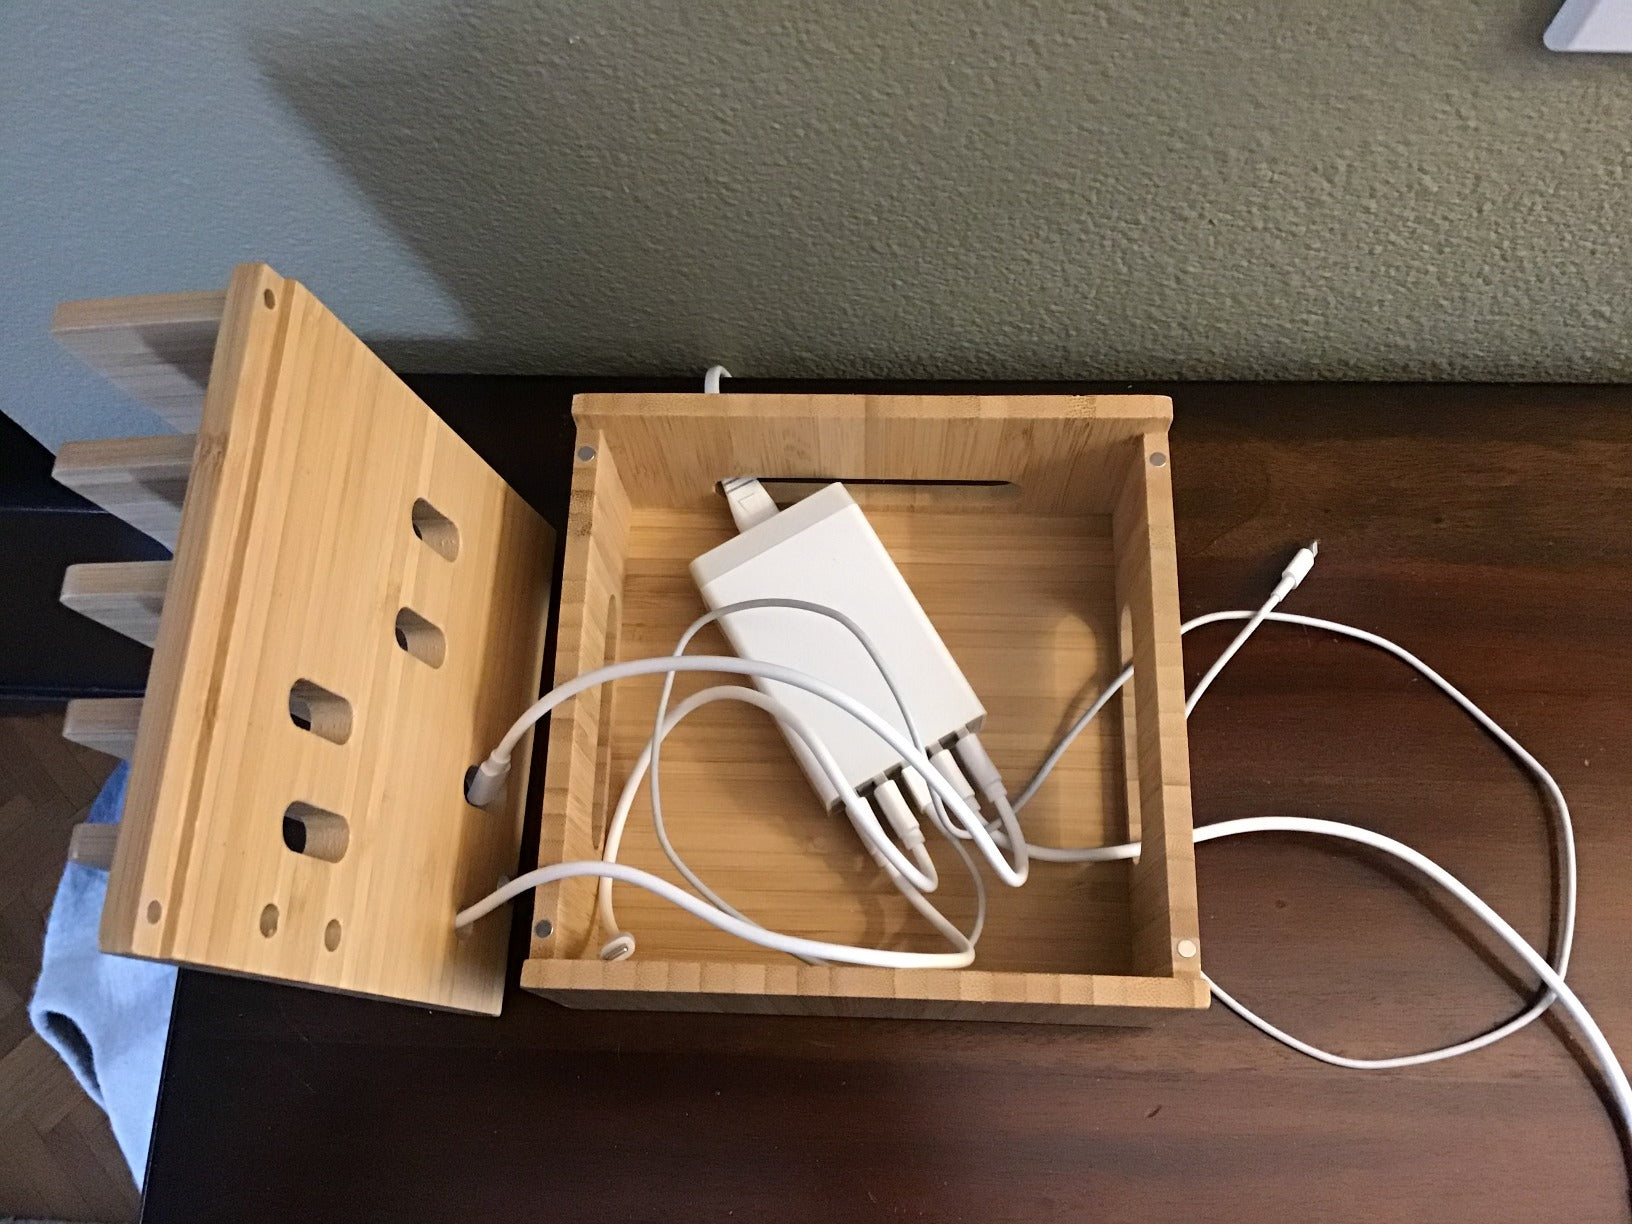 Charging Station for Multiple Devices (Included 5 Port USB Charger, 5 Pack Cables, SmartWatch & Earbuds Stand)